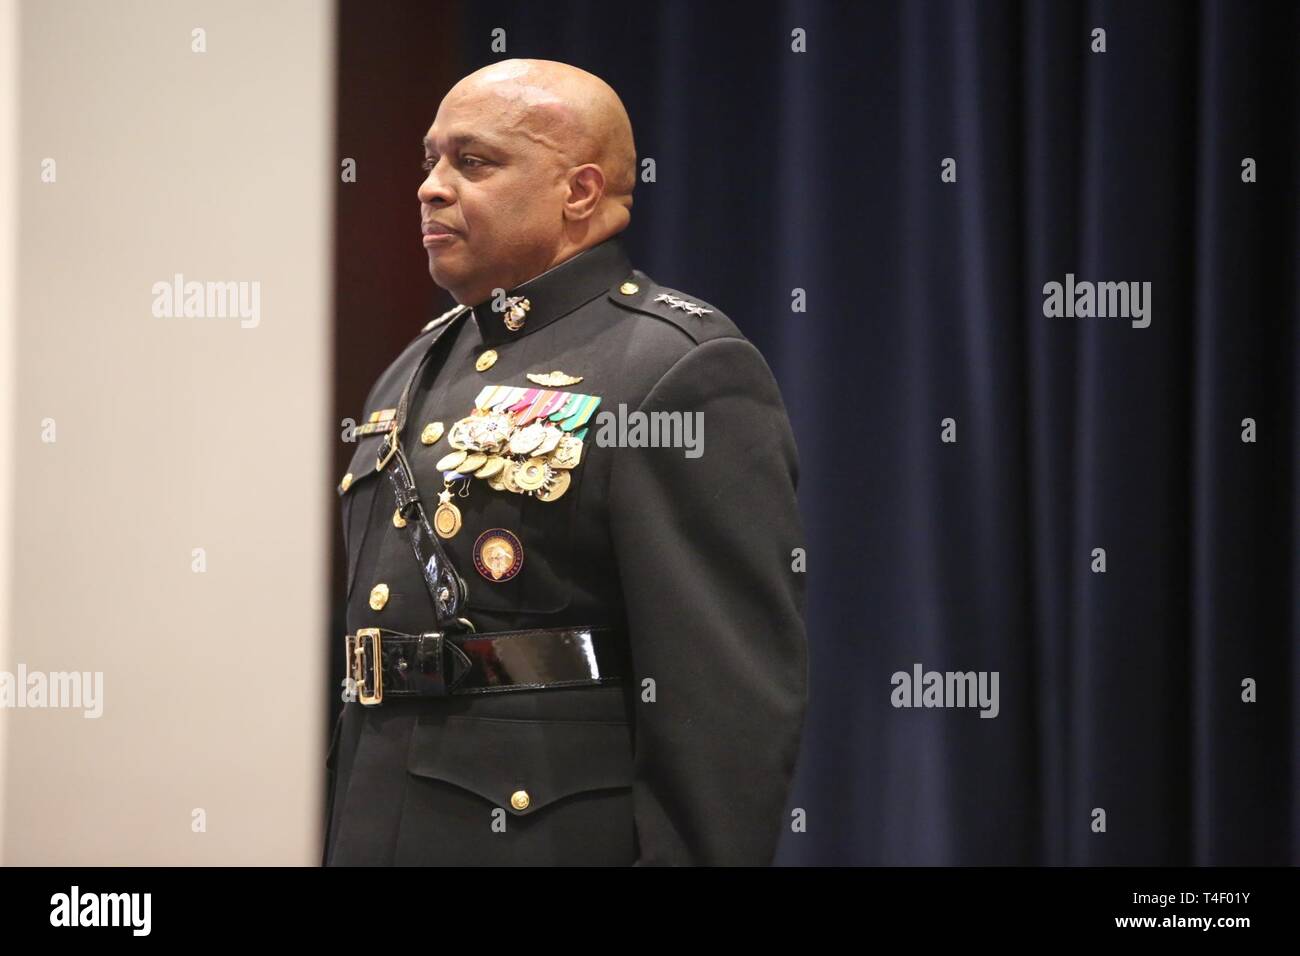 Lieutenant General Vincent R. Stewart stands at attention during his retirement ceremony at Marine Barracks Washington D.C., Apr. 5, 2019. Lt. Gen. Stewart, Deputy Commander at United States Cyber Command, retired after more than 40 years of dedicated and faithful service to our Corps. Stock Photo